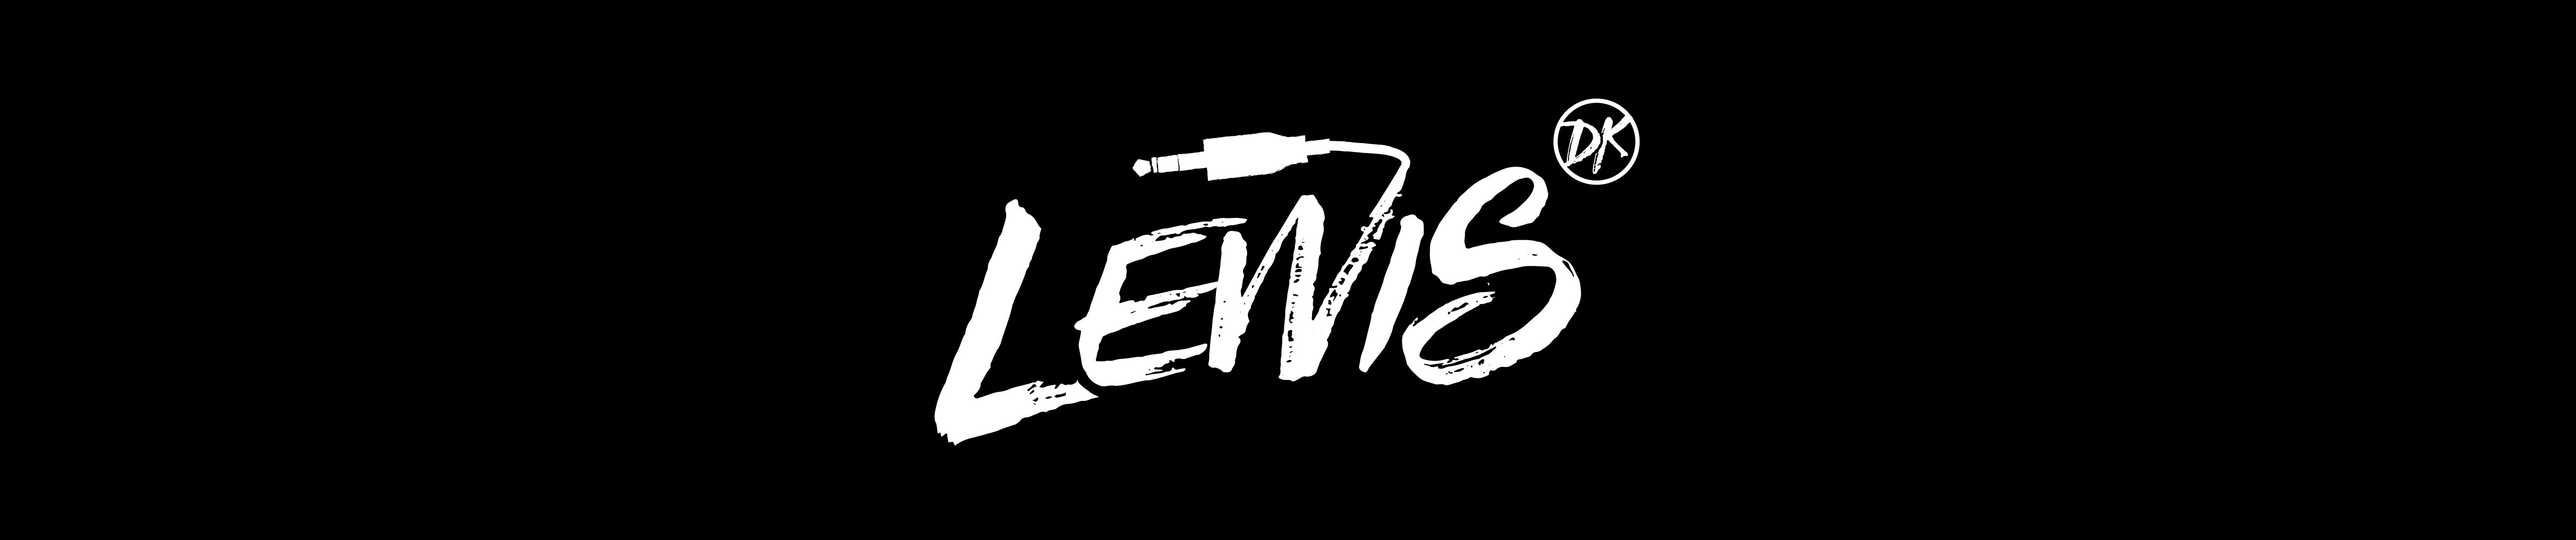 Stream DJ Lewis Official music | Listen to songs, albums, playlists for 